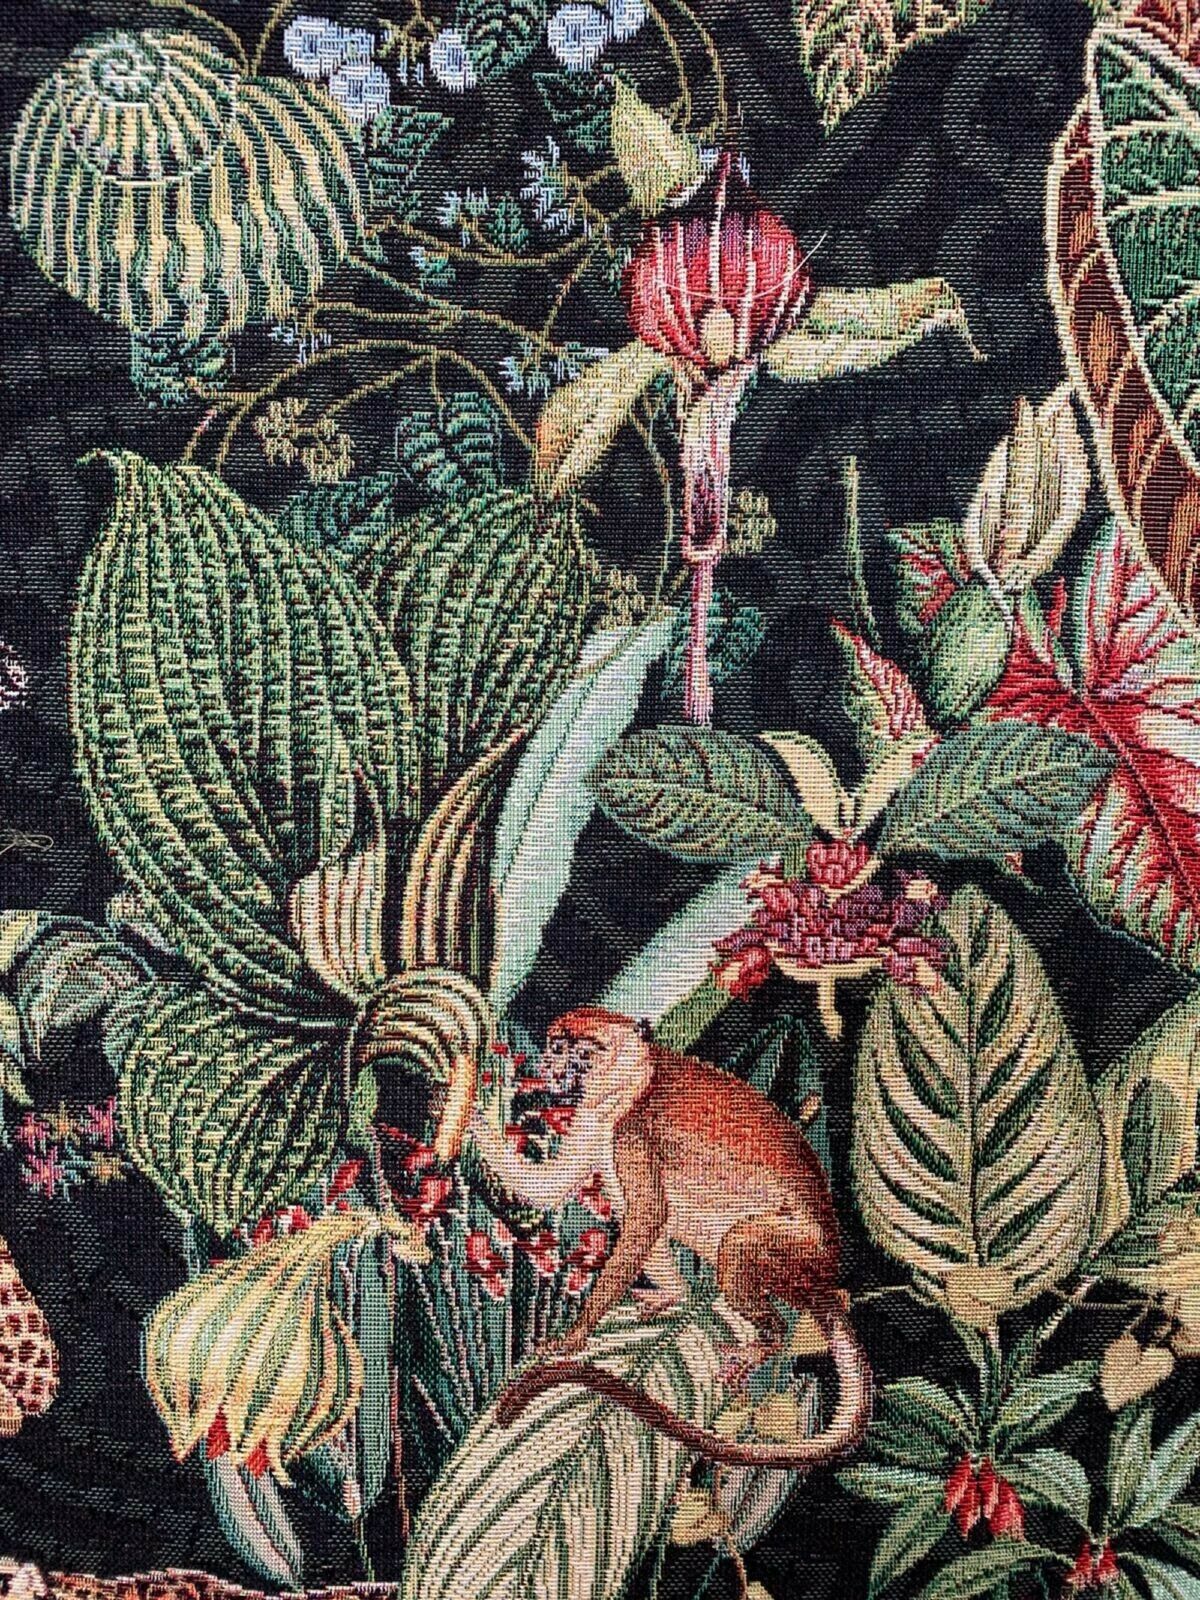 Jungle Kingdom: Black Woven Animal Fabric by the Meter